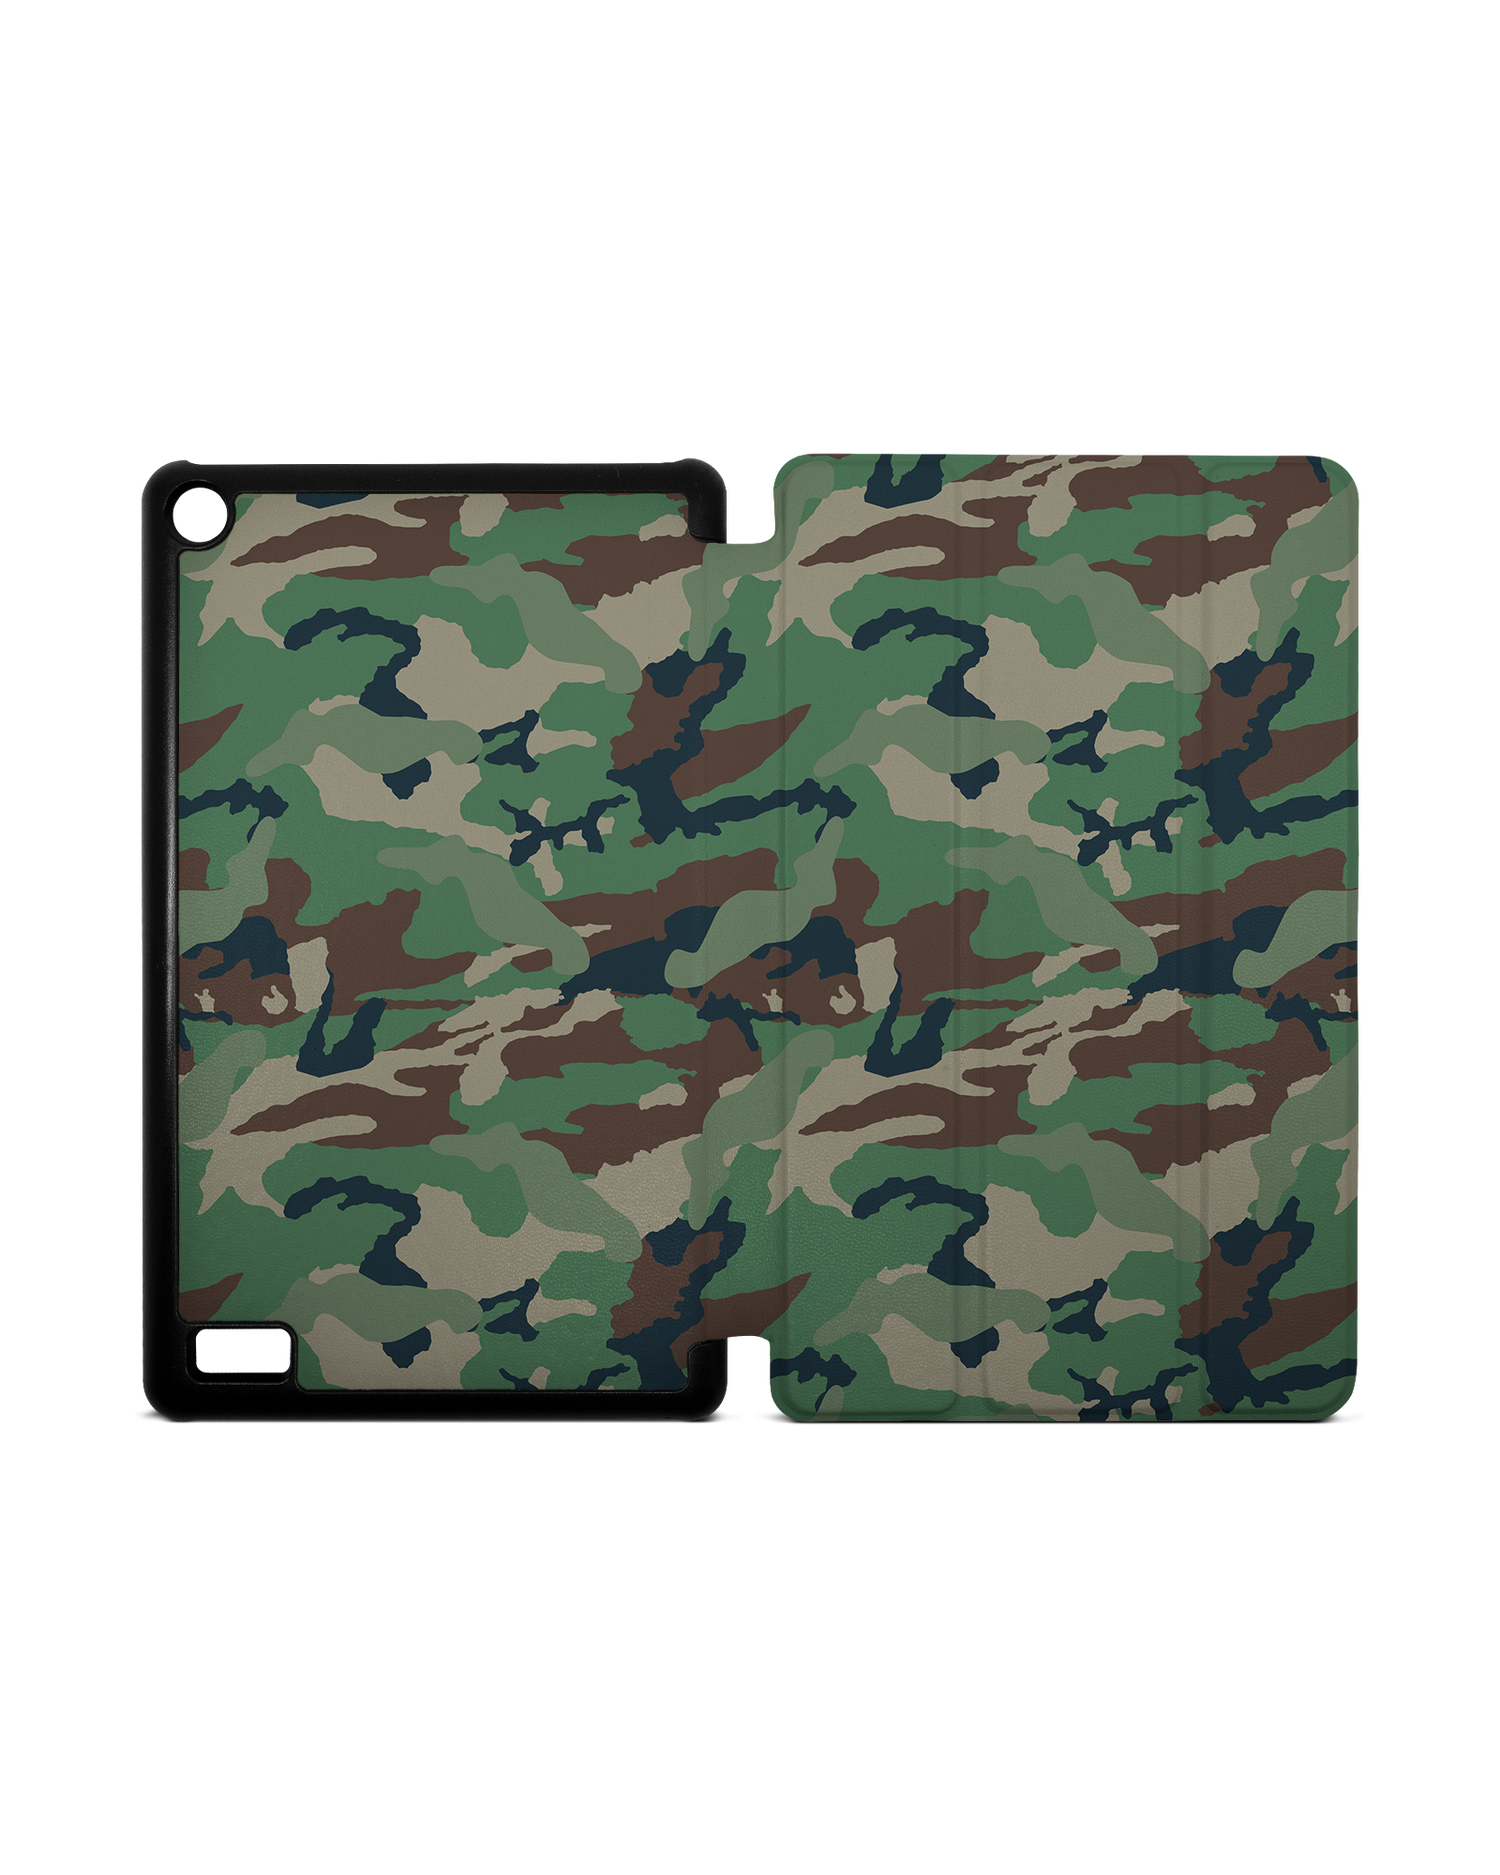 Green and Brown Camo Tablet Smart Case for Amazon Fire 7: Opened